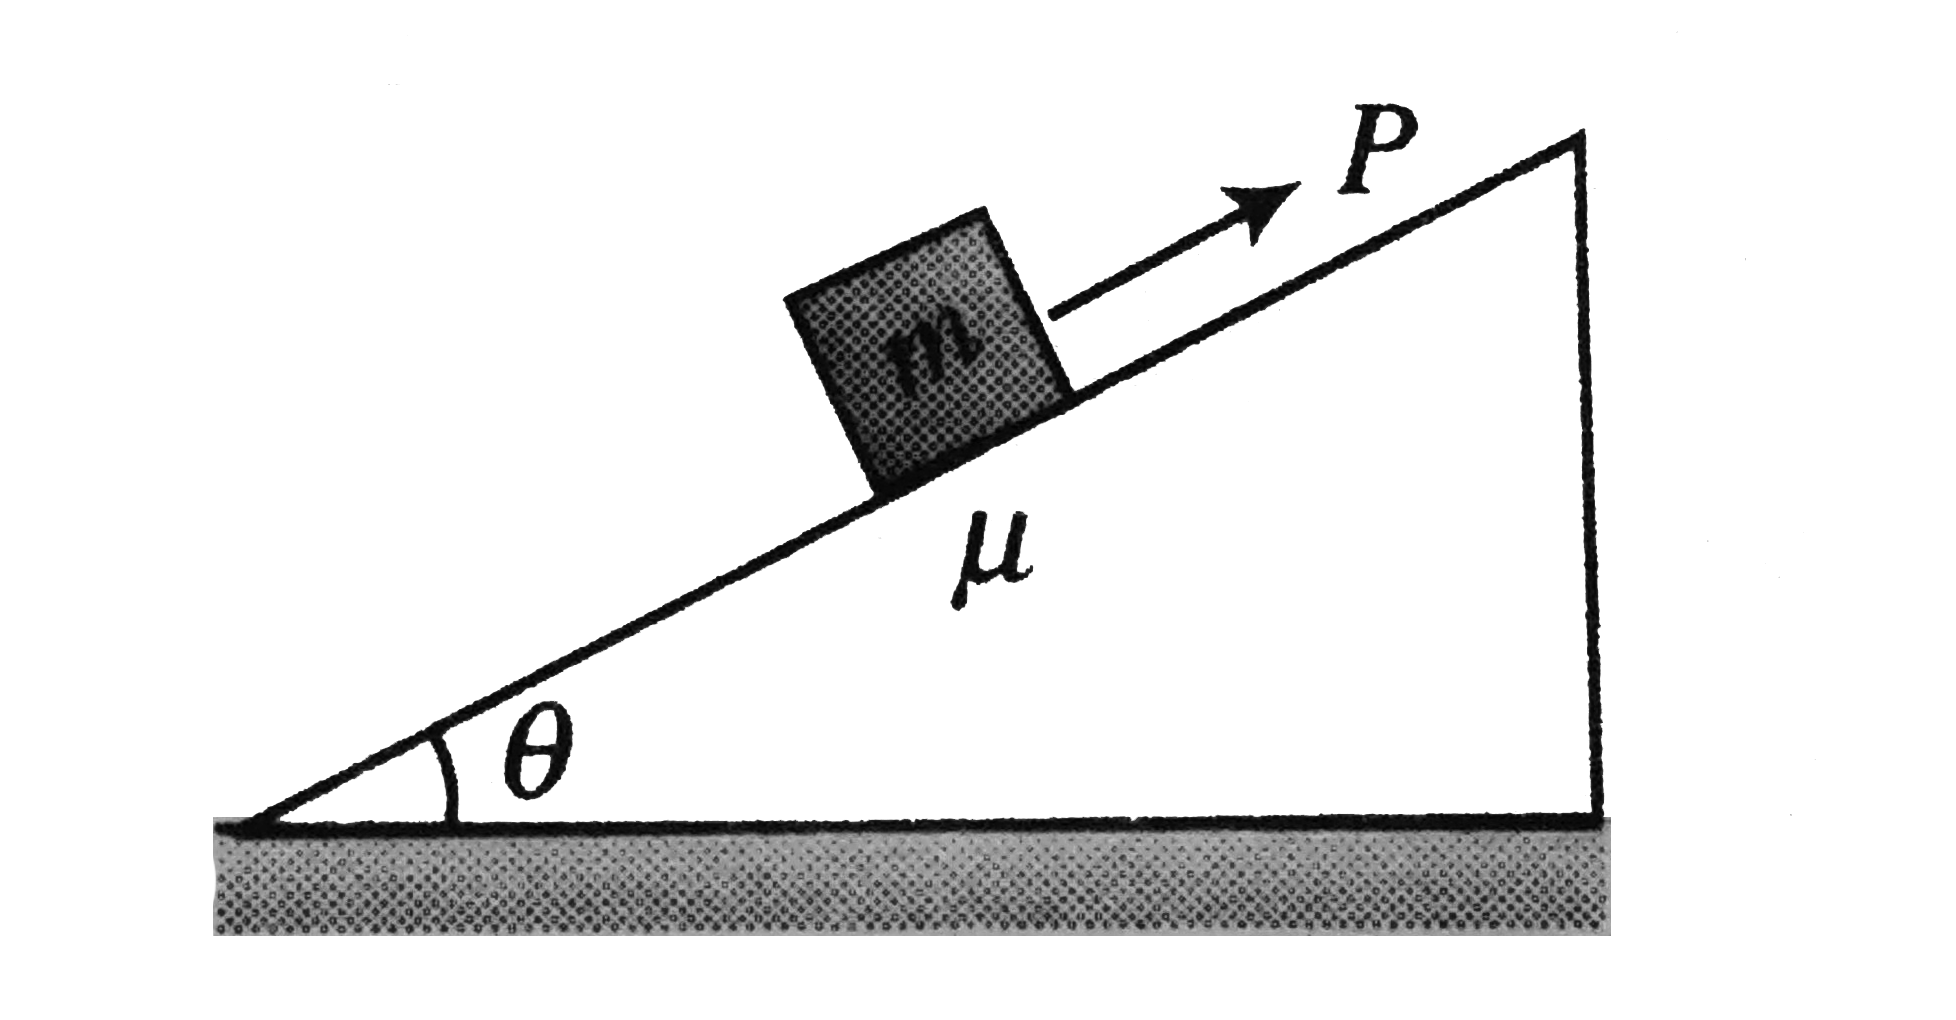 A block of mass m is being pulled up a rough incline by an agent delivering constant power P. The coefficient of friction between the block and the incline is mu. The maximum speed of the block during the course of ascent is